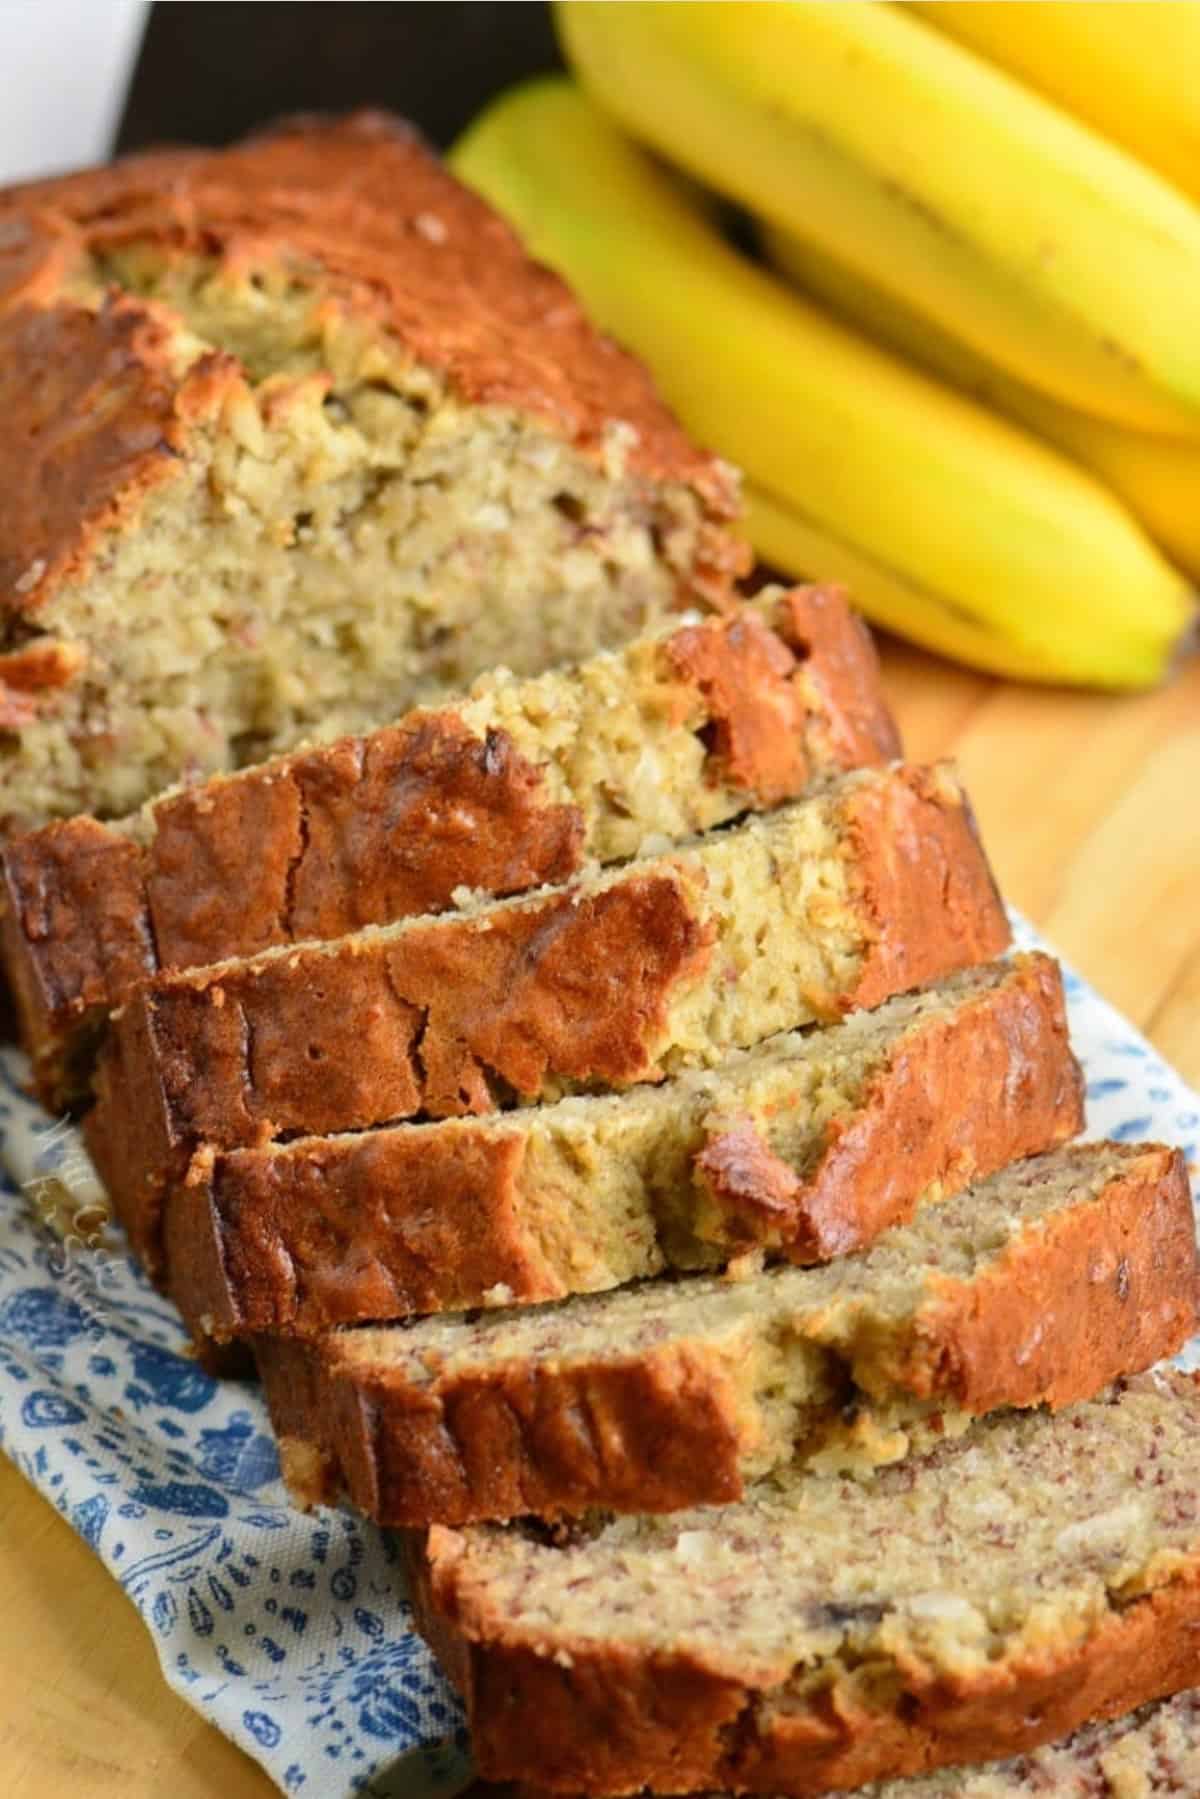 Coconut banana bread sliced up on a wood surface with bananas in the background.